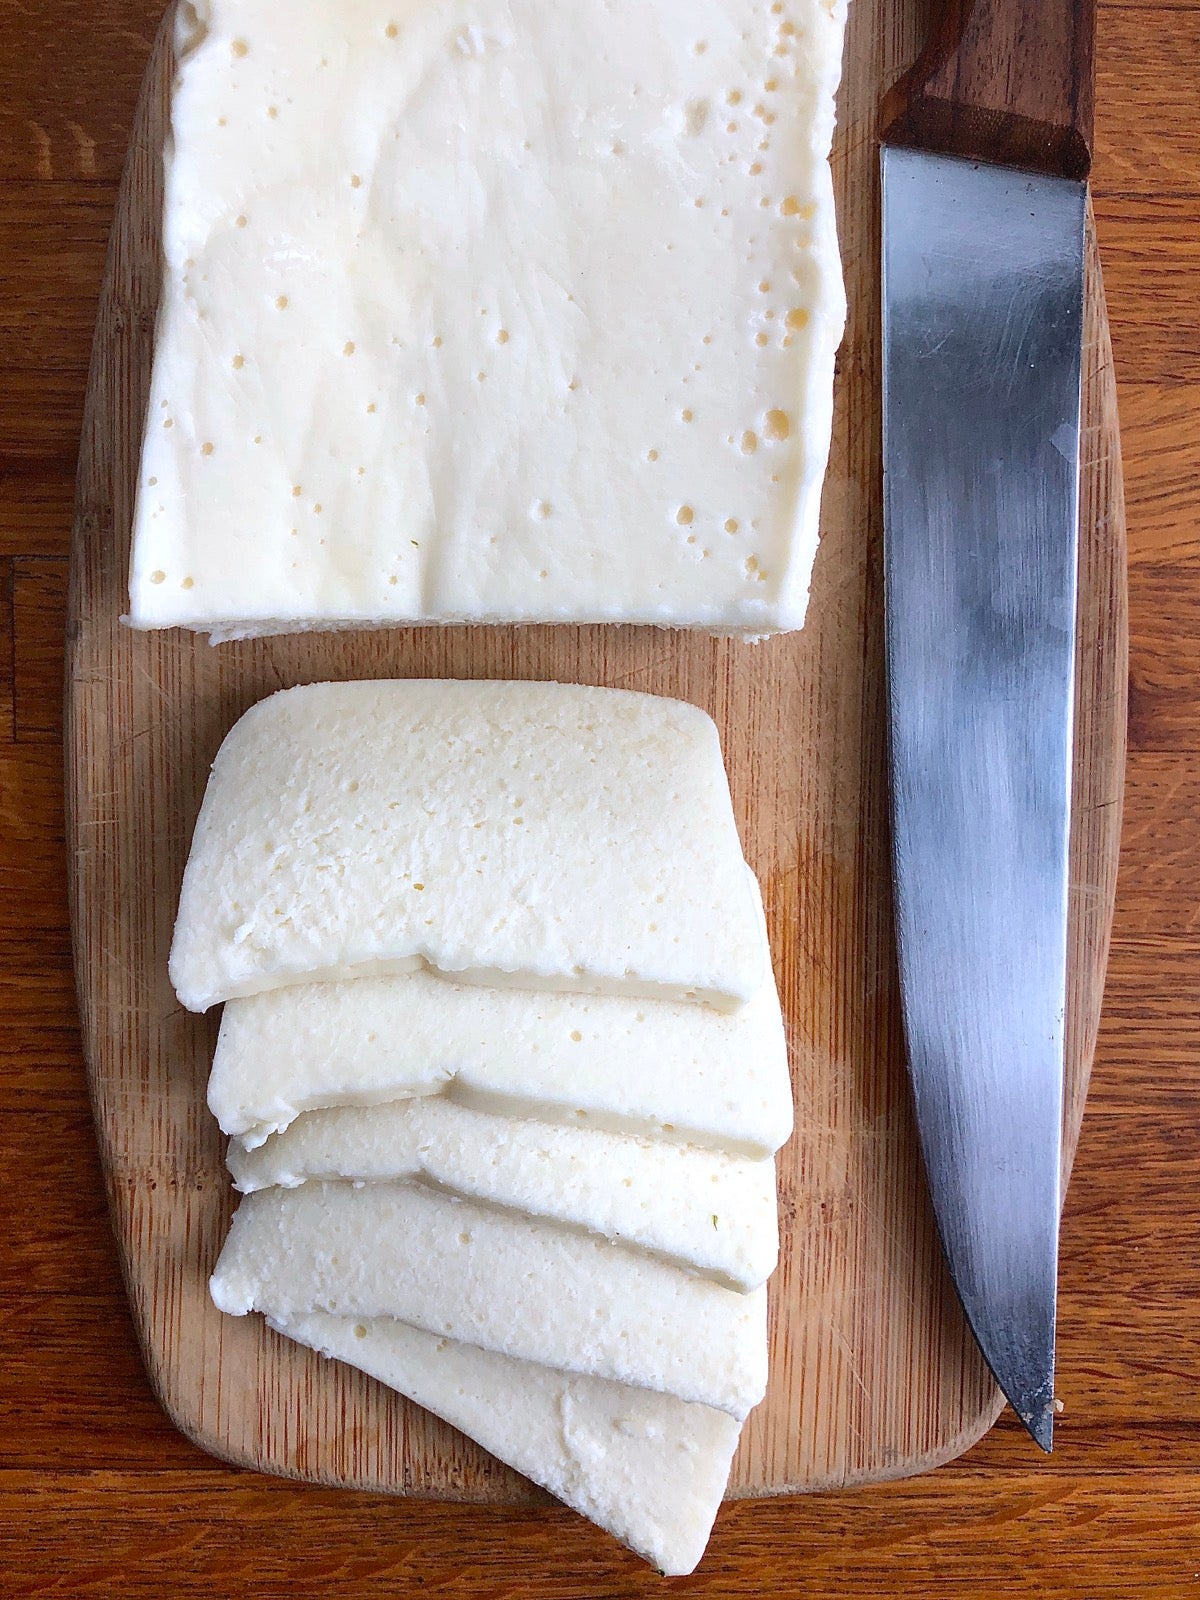 Chunk of blended cheeses — Asiago, Parmesan, and cheddar — sliced on a cutting board.